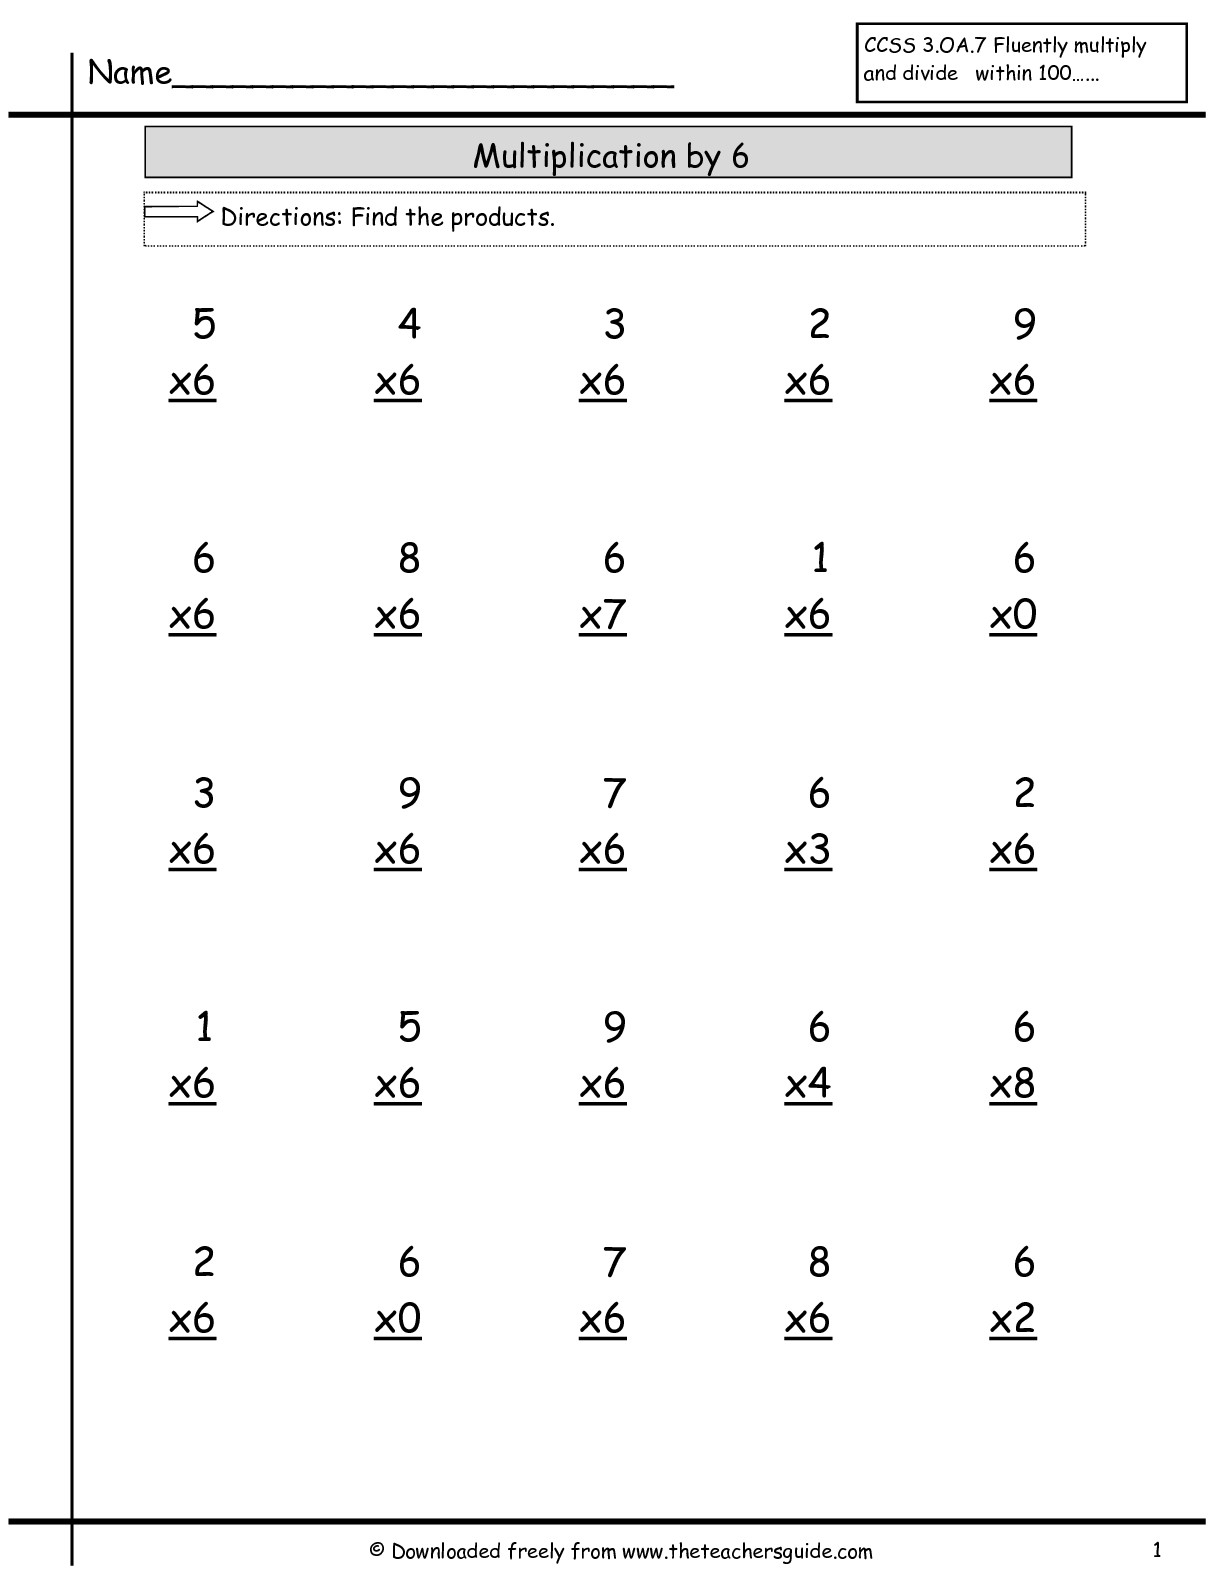 Multiplication Facts Worksheets From The Teacher&amp;#039;s Guide with Multiplication Worksheets 8 Facts